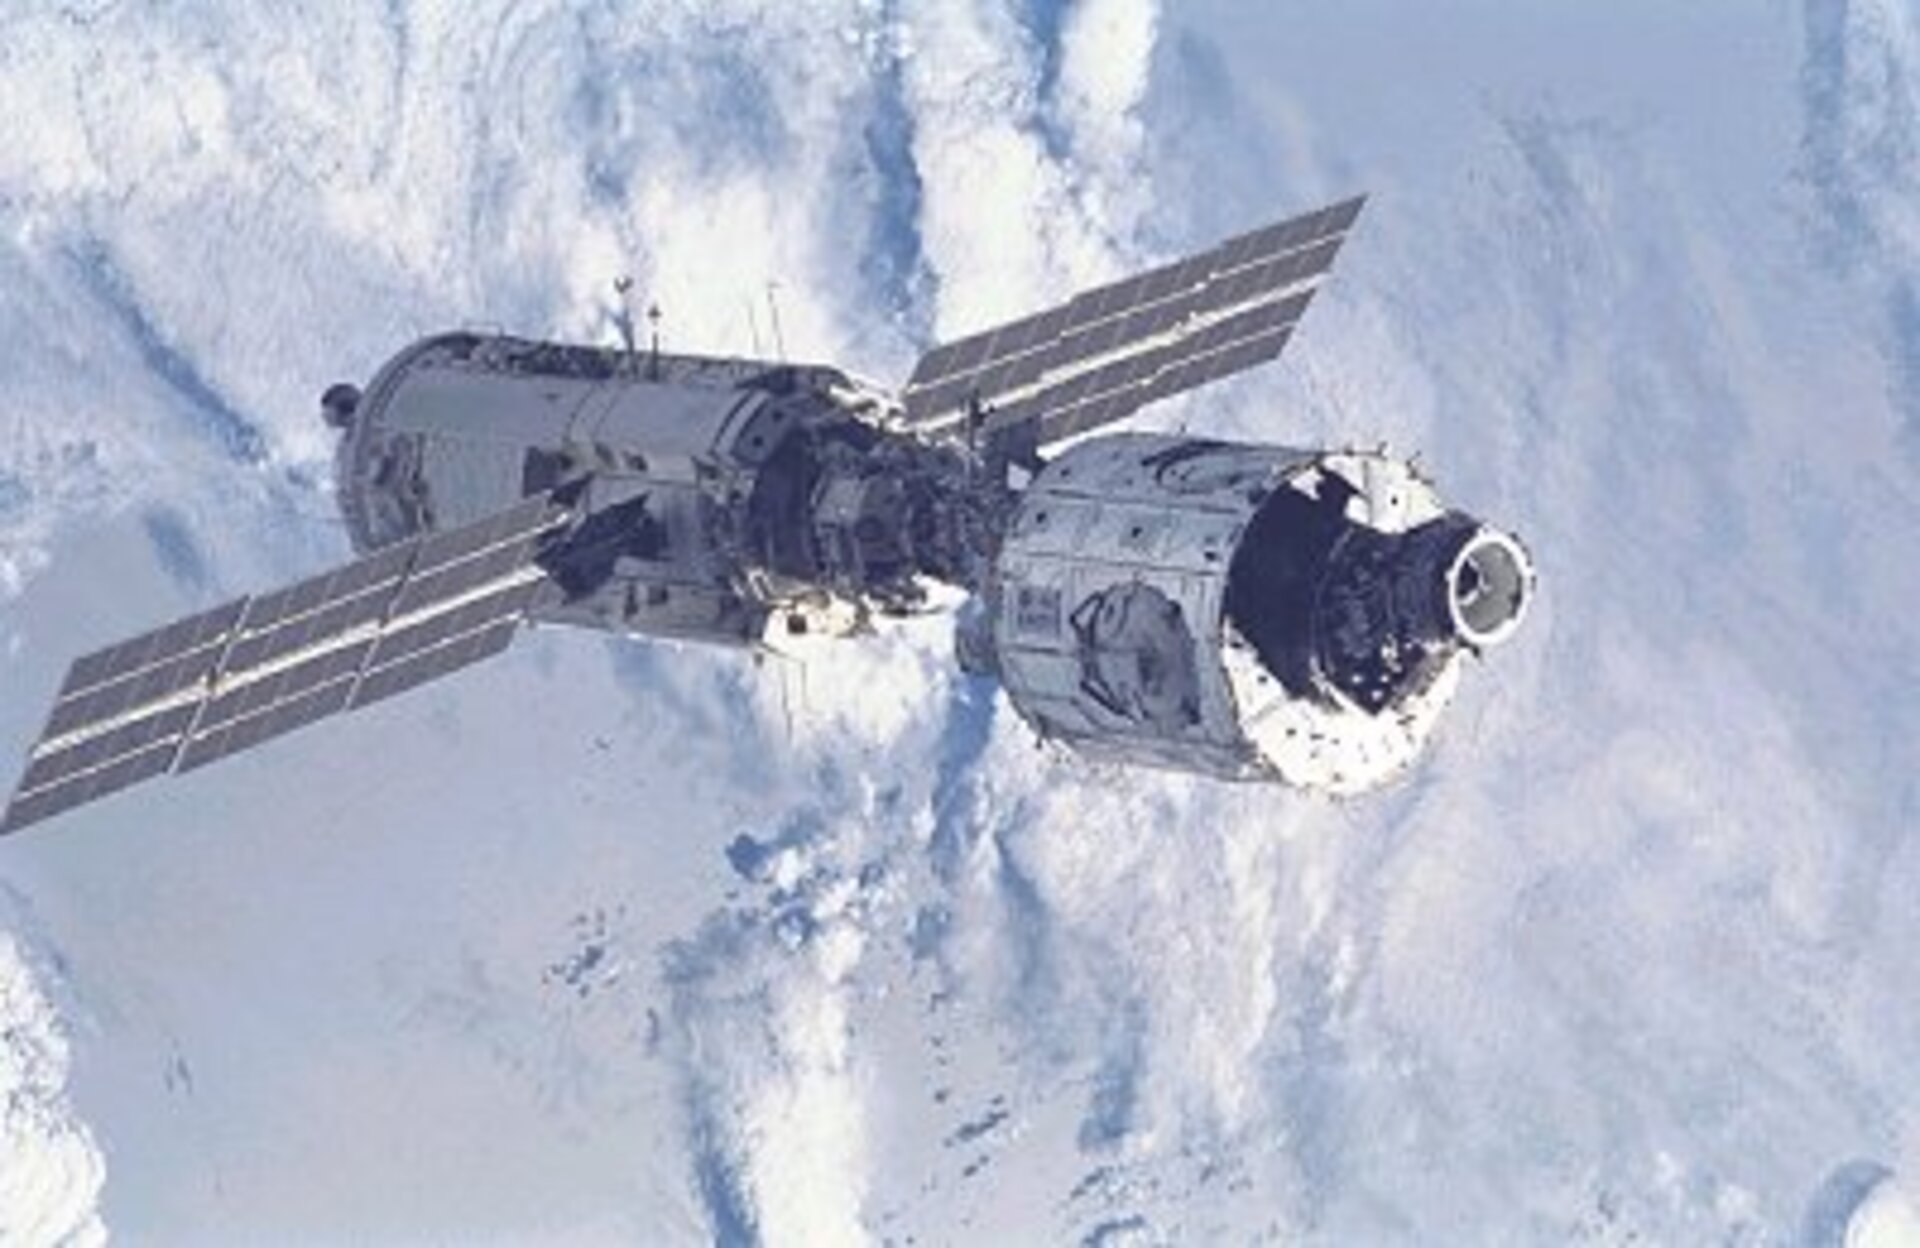 Zarya and Unity are released by Space Shuttle Endeavour after docking